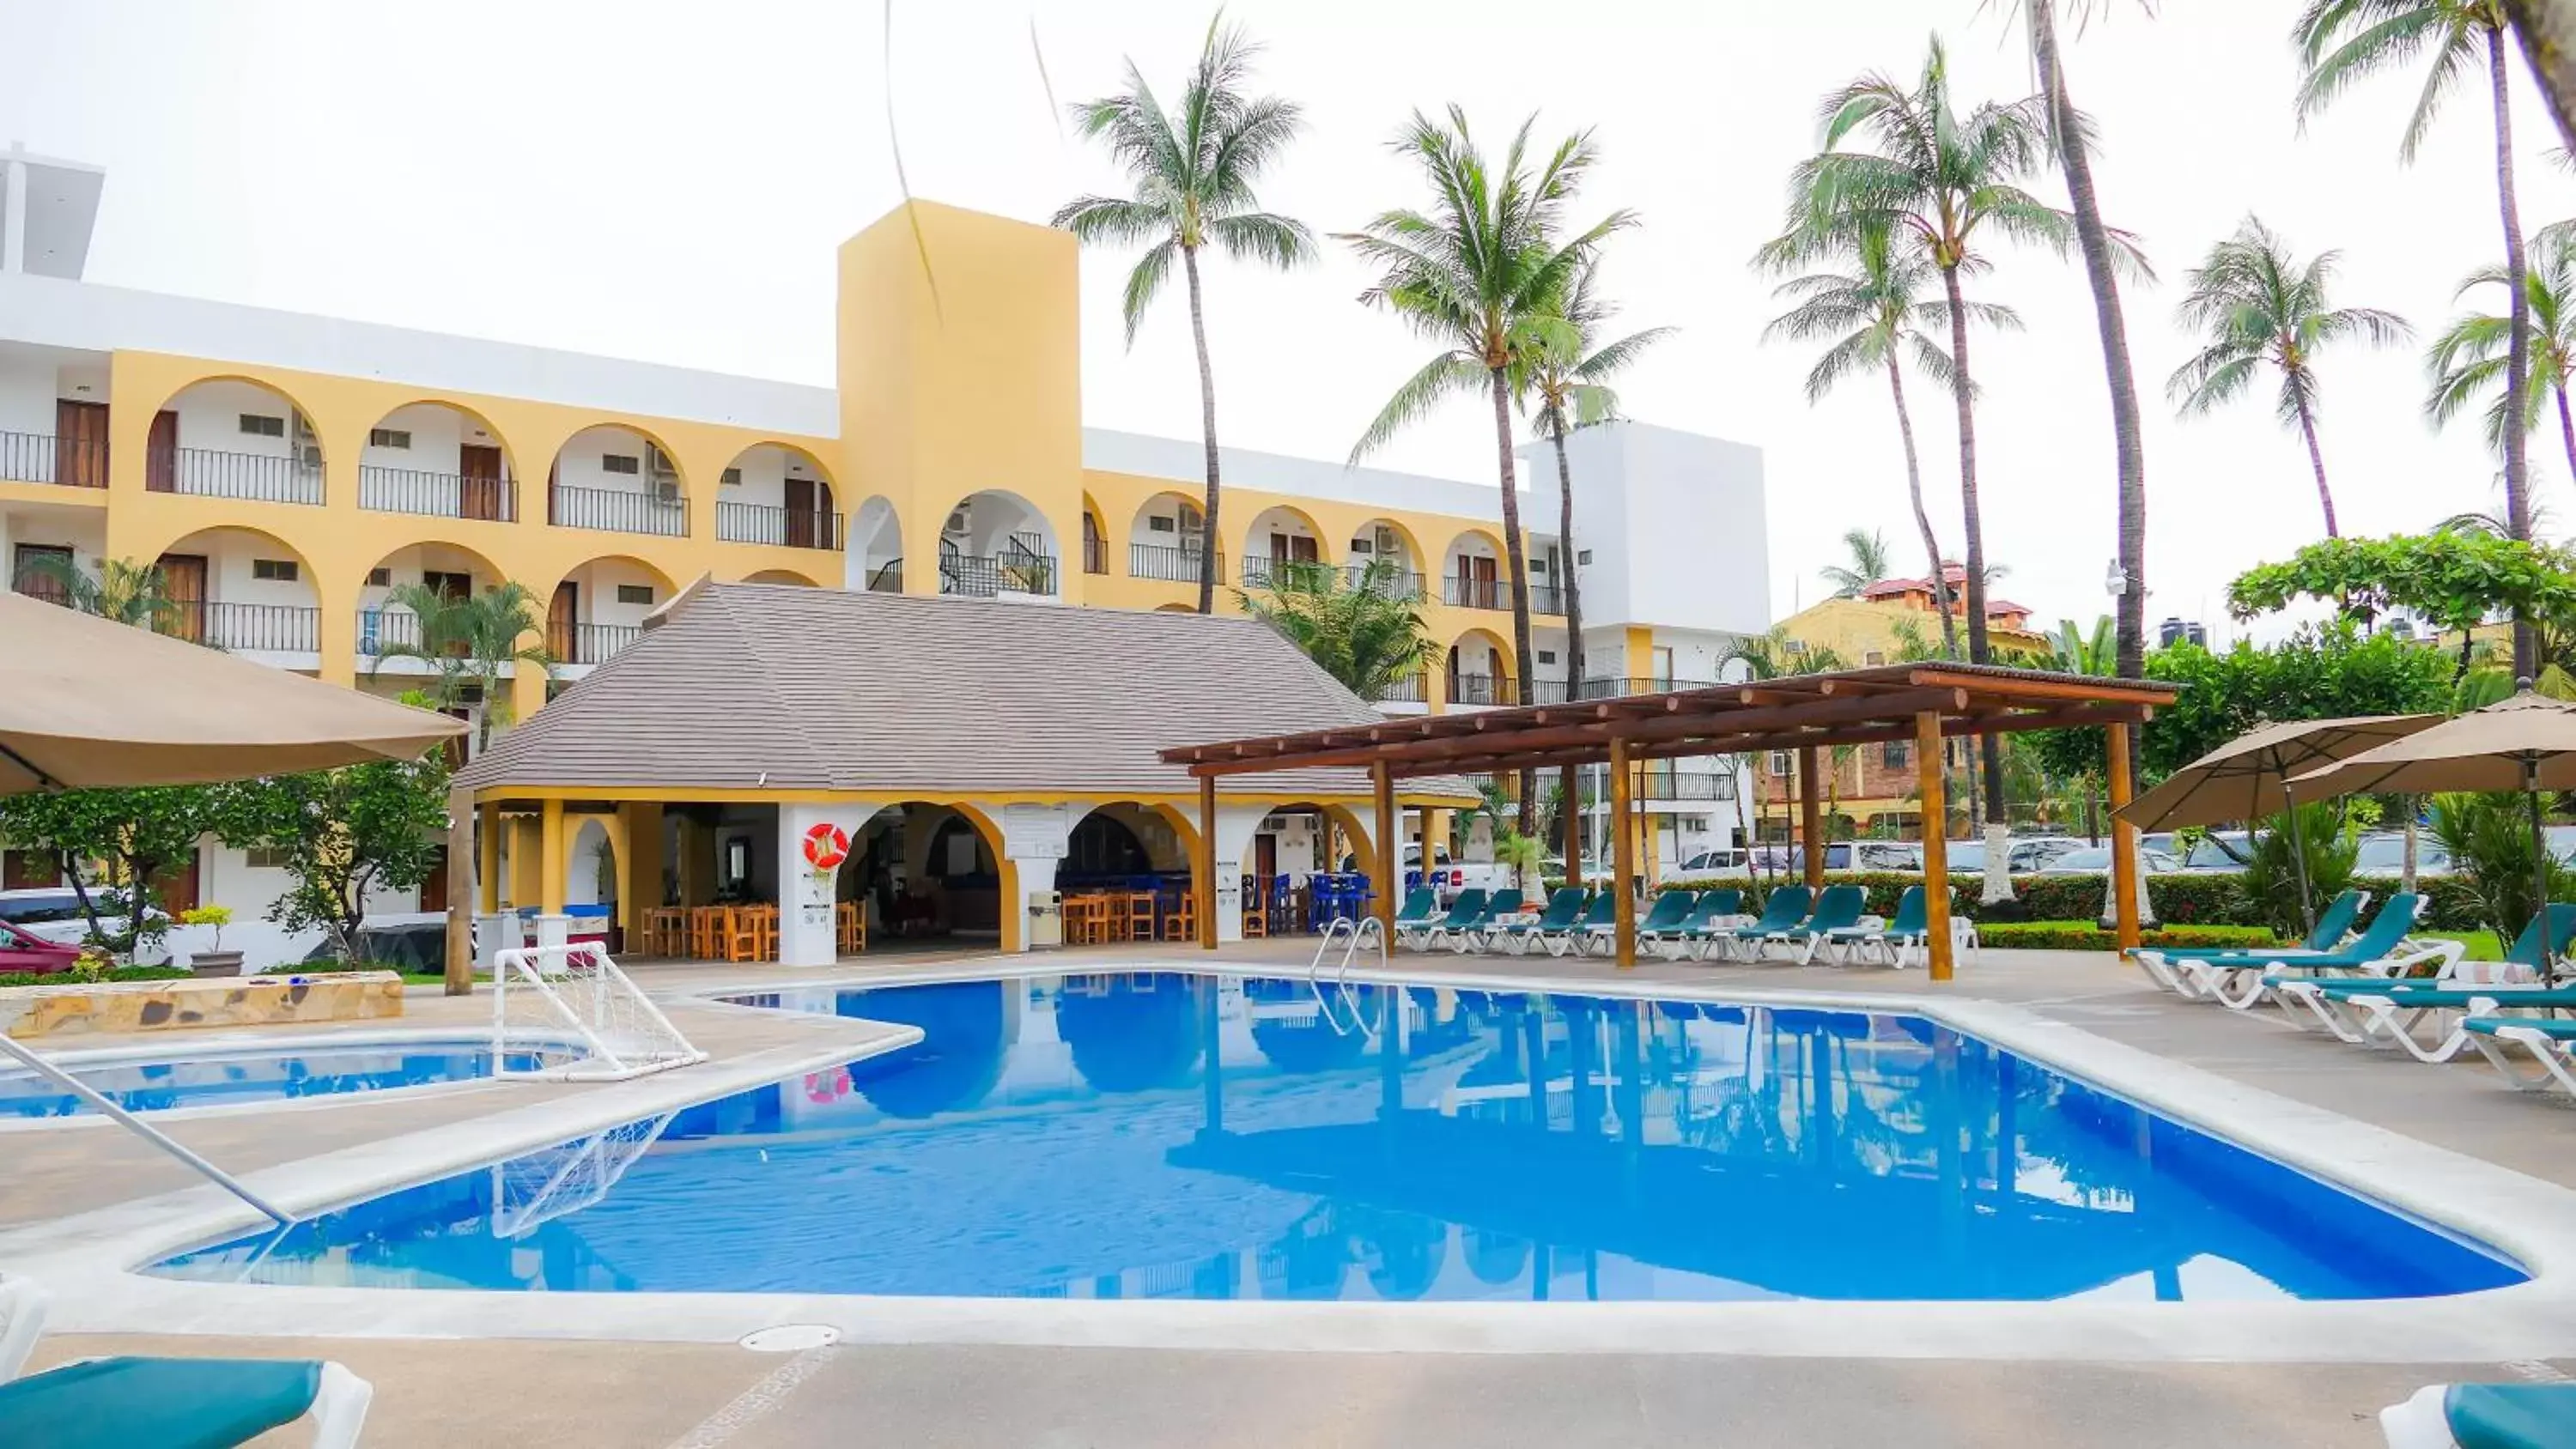 Property building, Swimming Pool in Costa Alegre Hotel & Suites